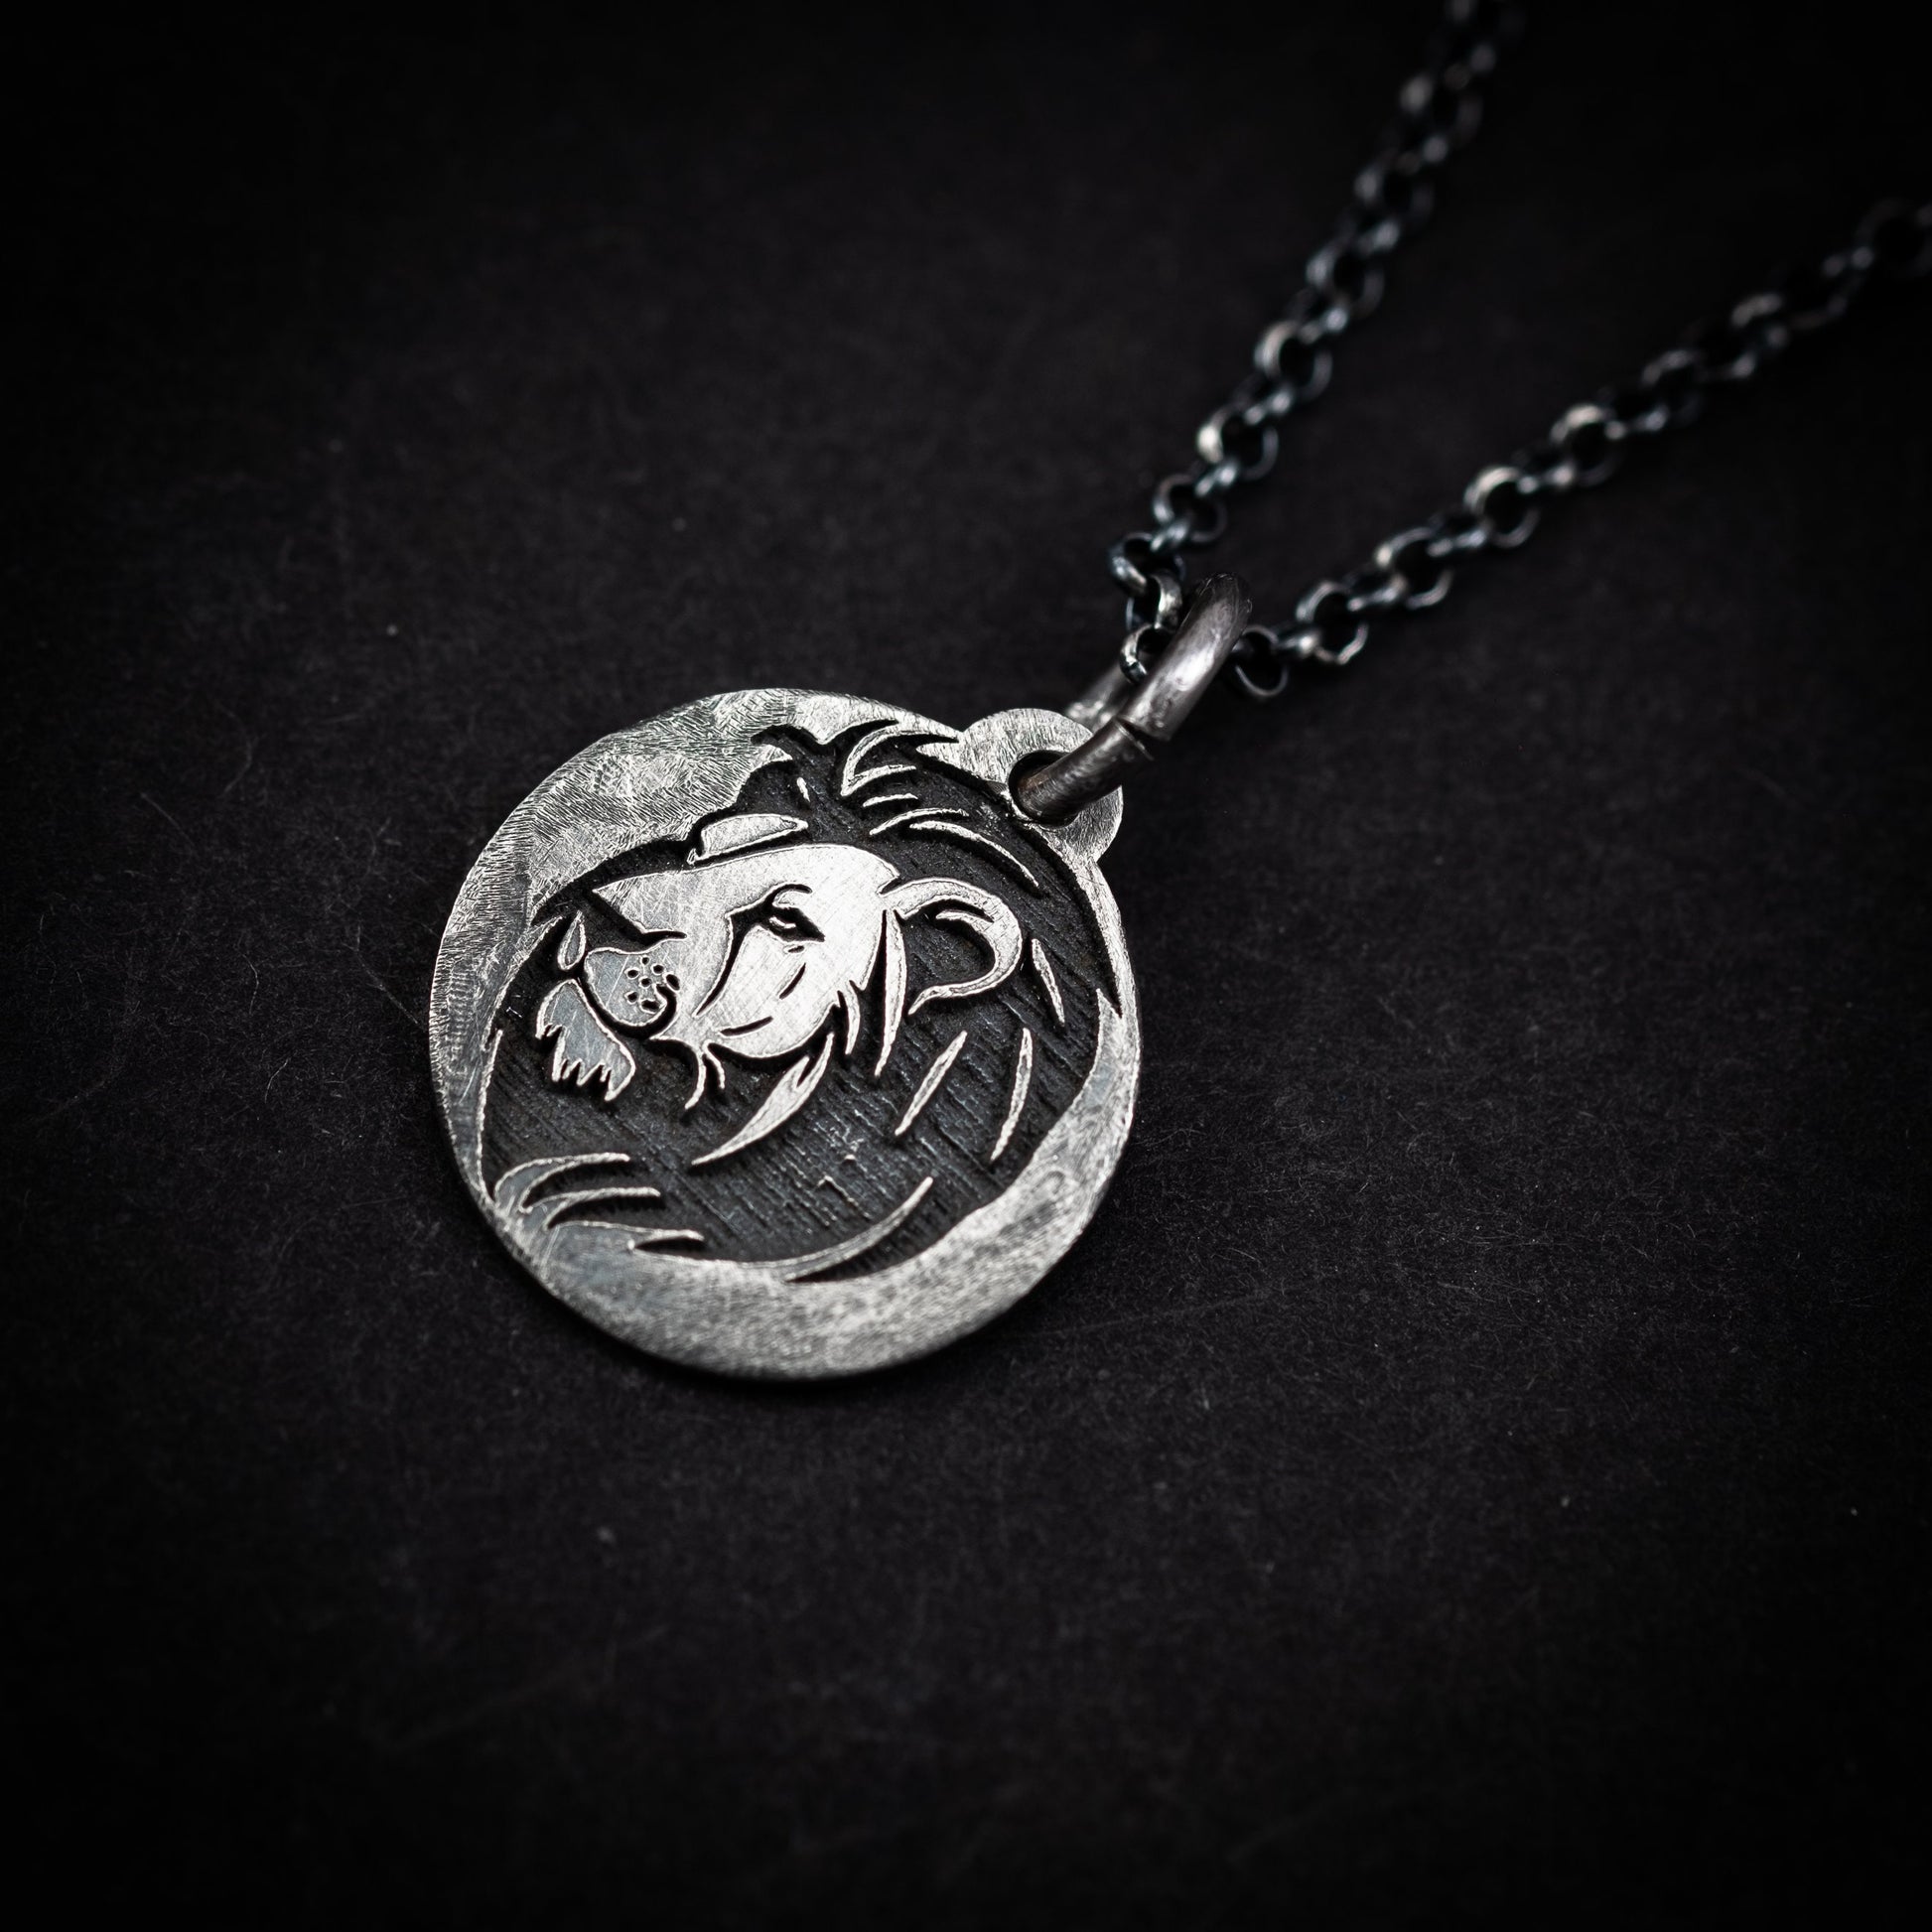 Lion head Silver pendant necklace, Protection Strength amulet Leo zodiac necklace, oxidized Astrology jewelry, ,mens sterling silver gift